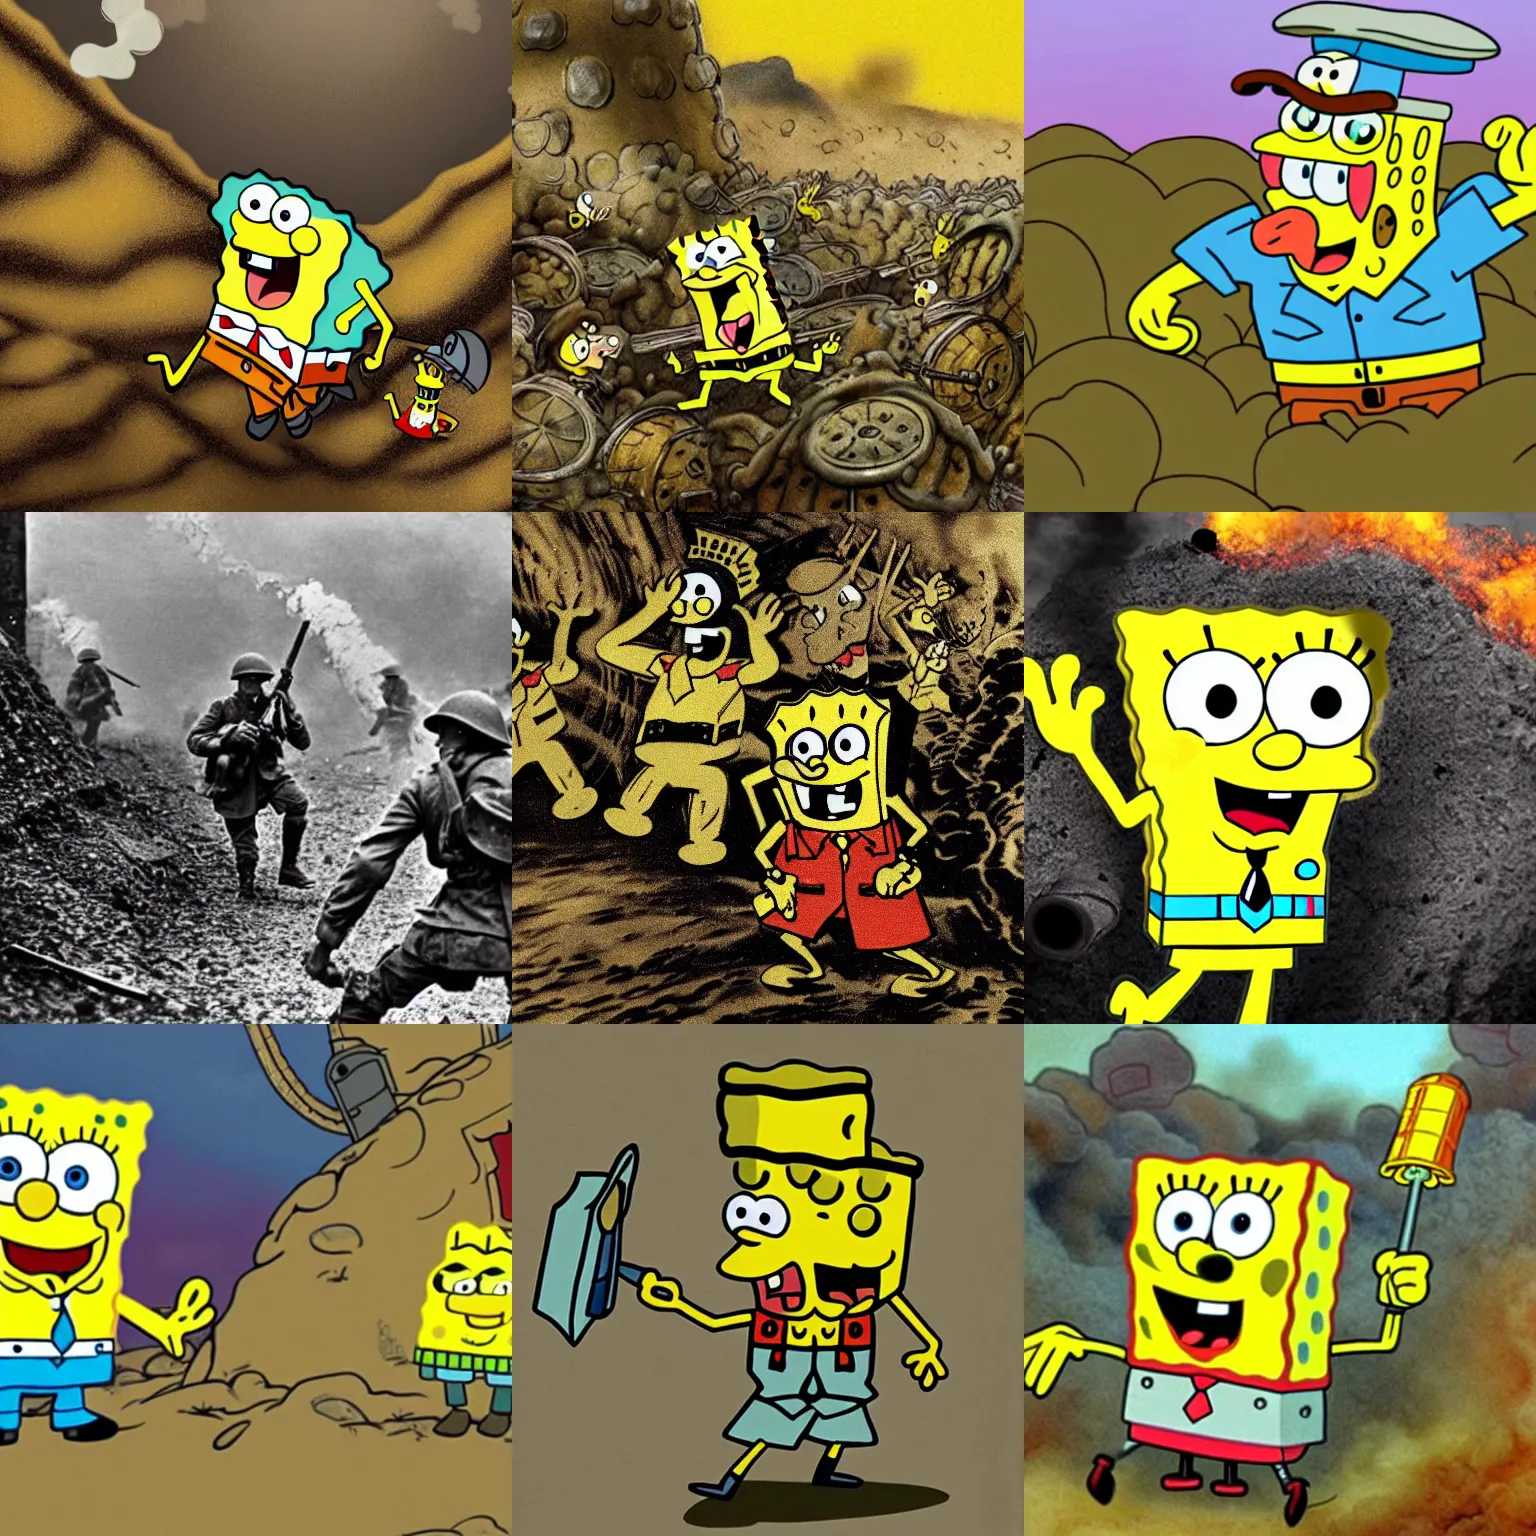 Prompt: Spongebob charging through the trenches in World War 1, moving through mustard gas